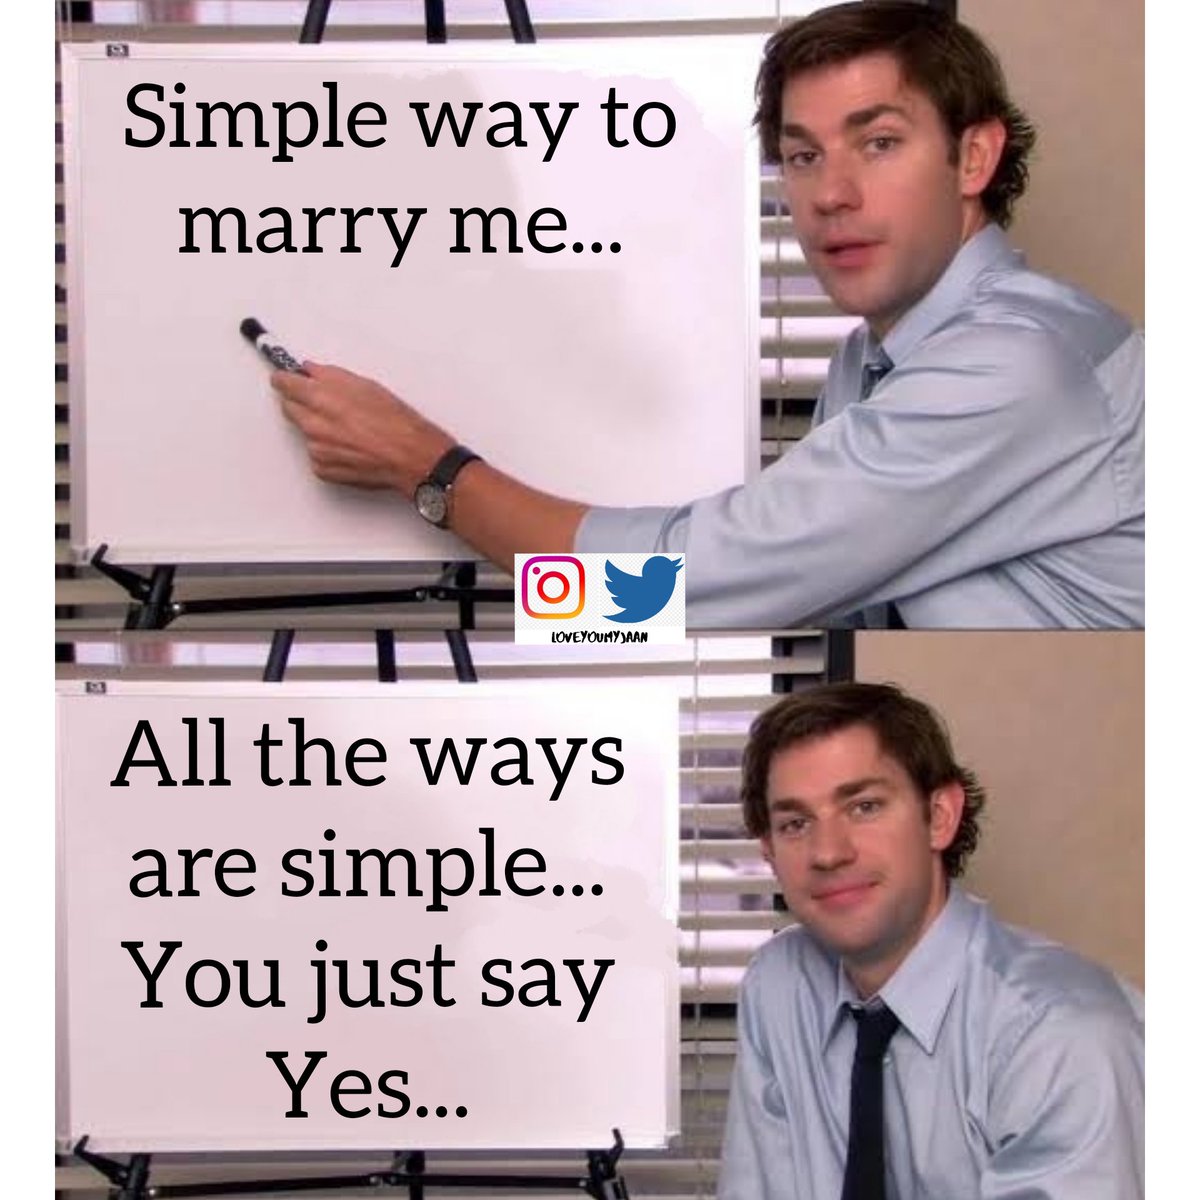 Ohh my crush...!!!
Will you marry me????
#ogloveyoumyjaan #meme #memes #jimhalpert #jimhalpertedit #jimhalpertmemes #crush #crushedits #crushmemes #marriage #marriagegoals #marriageproposal #marriageproposalideas #propose